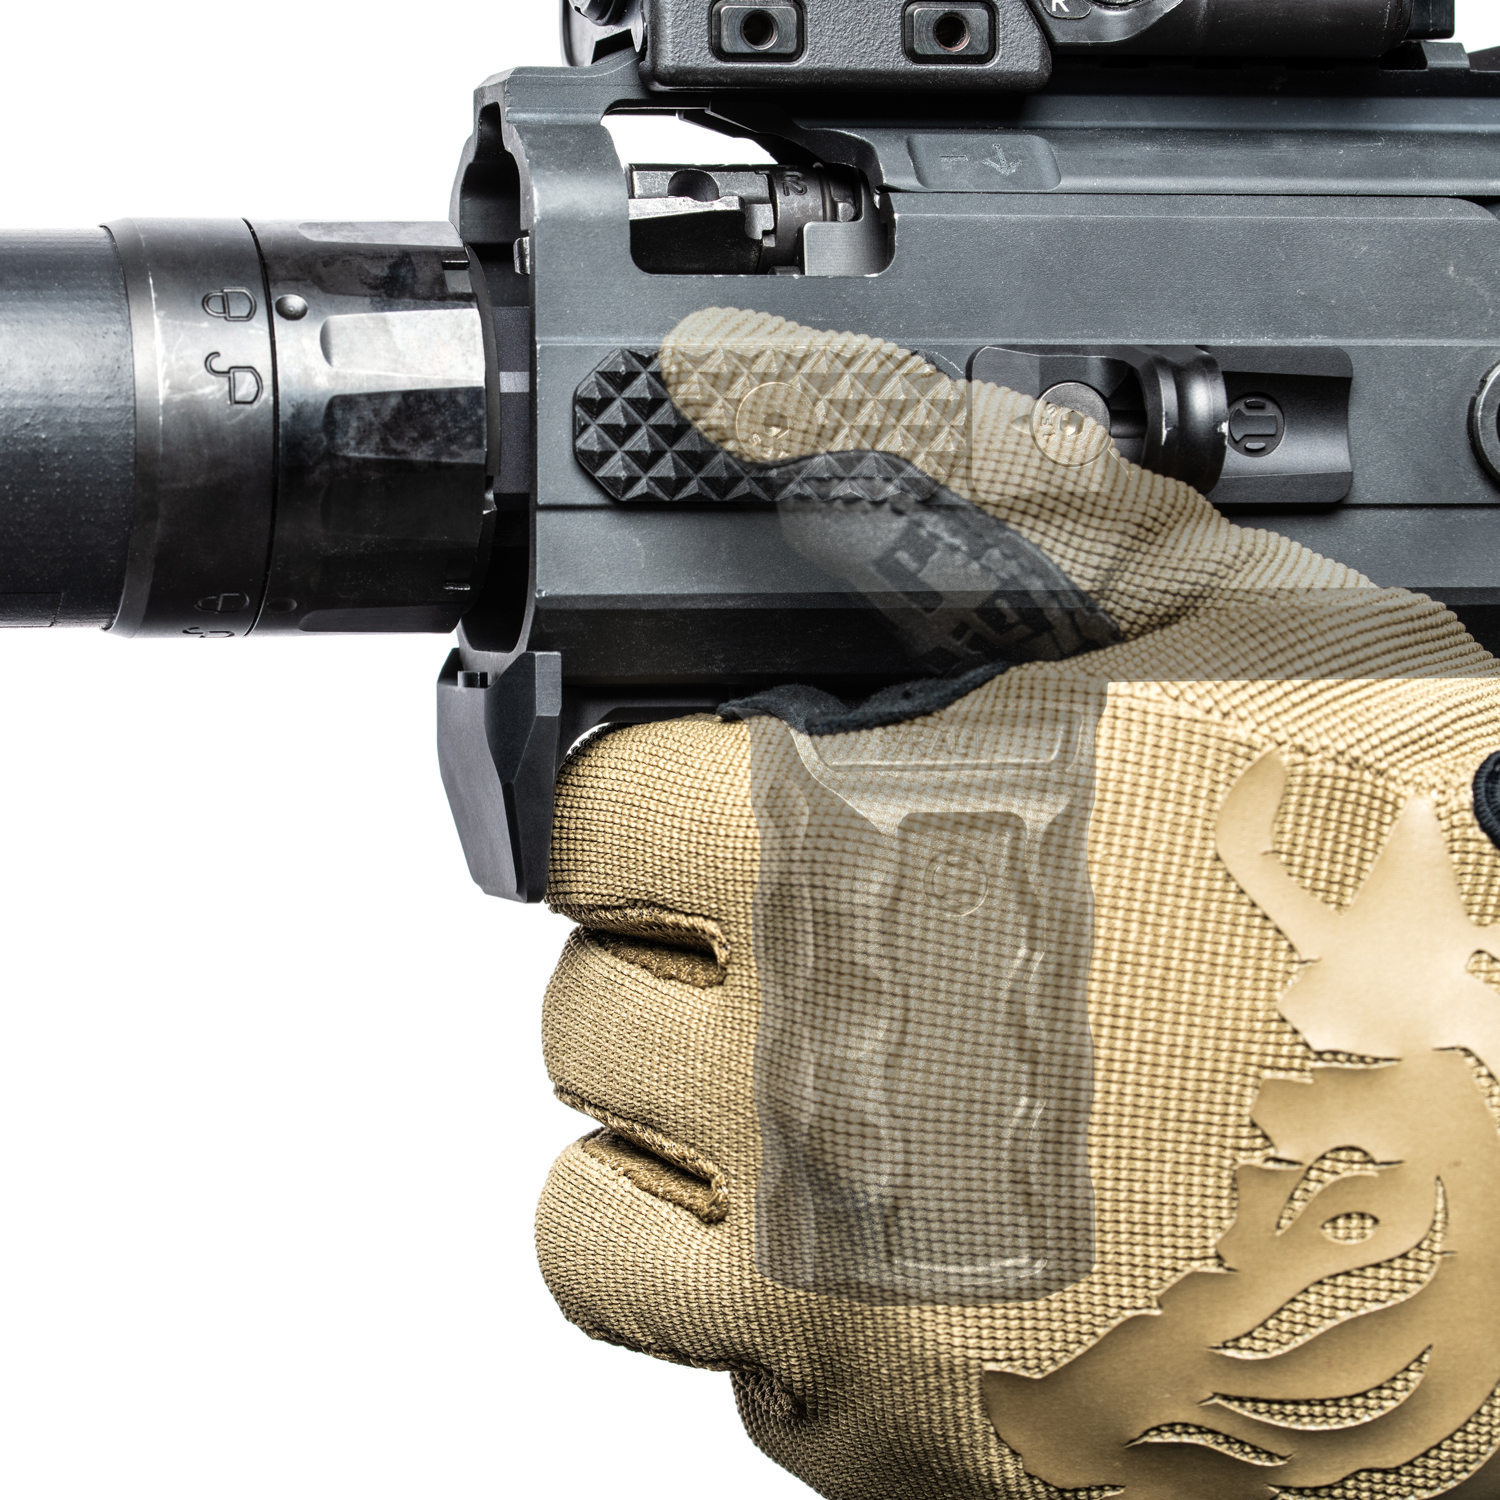 what foregrip does the military use